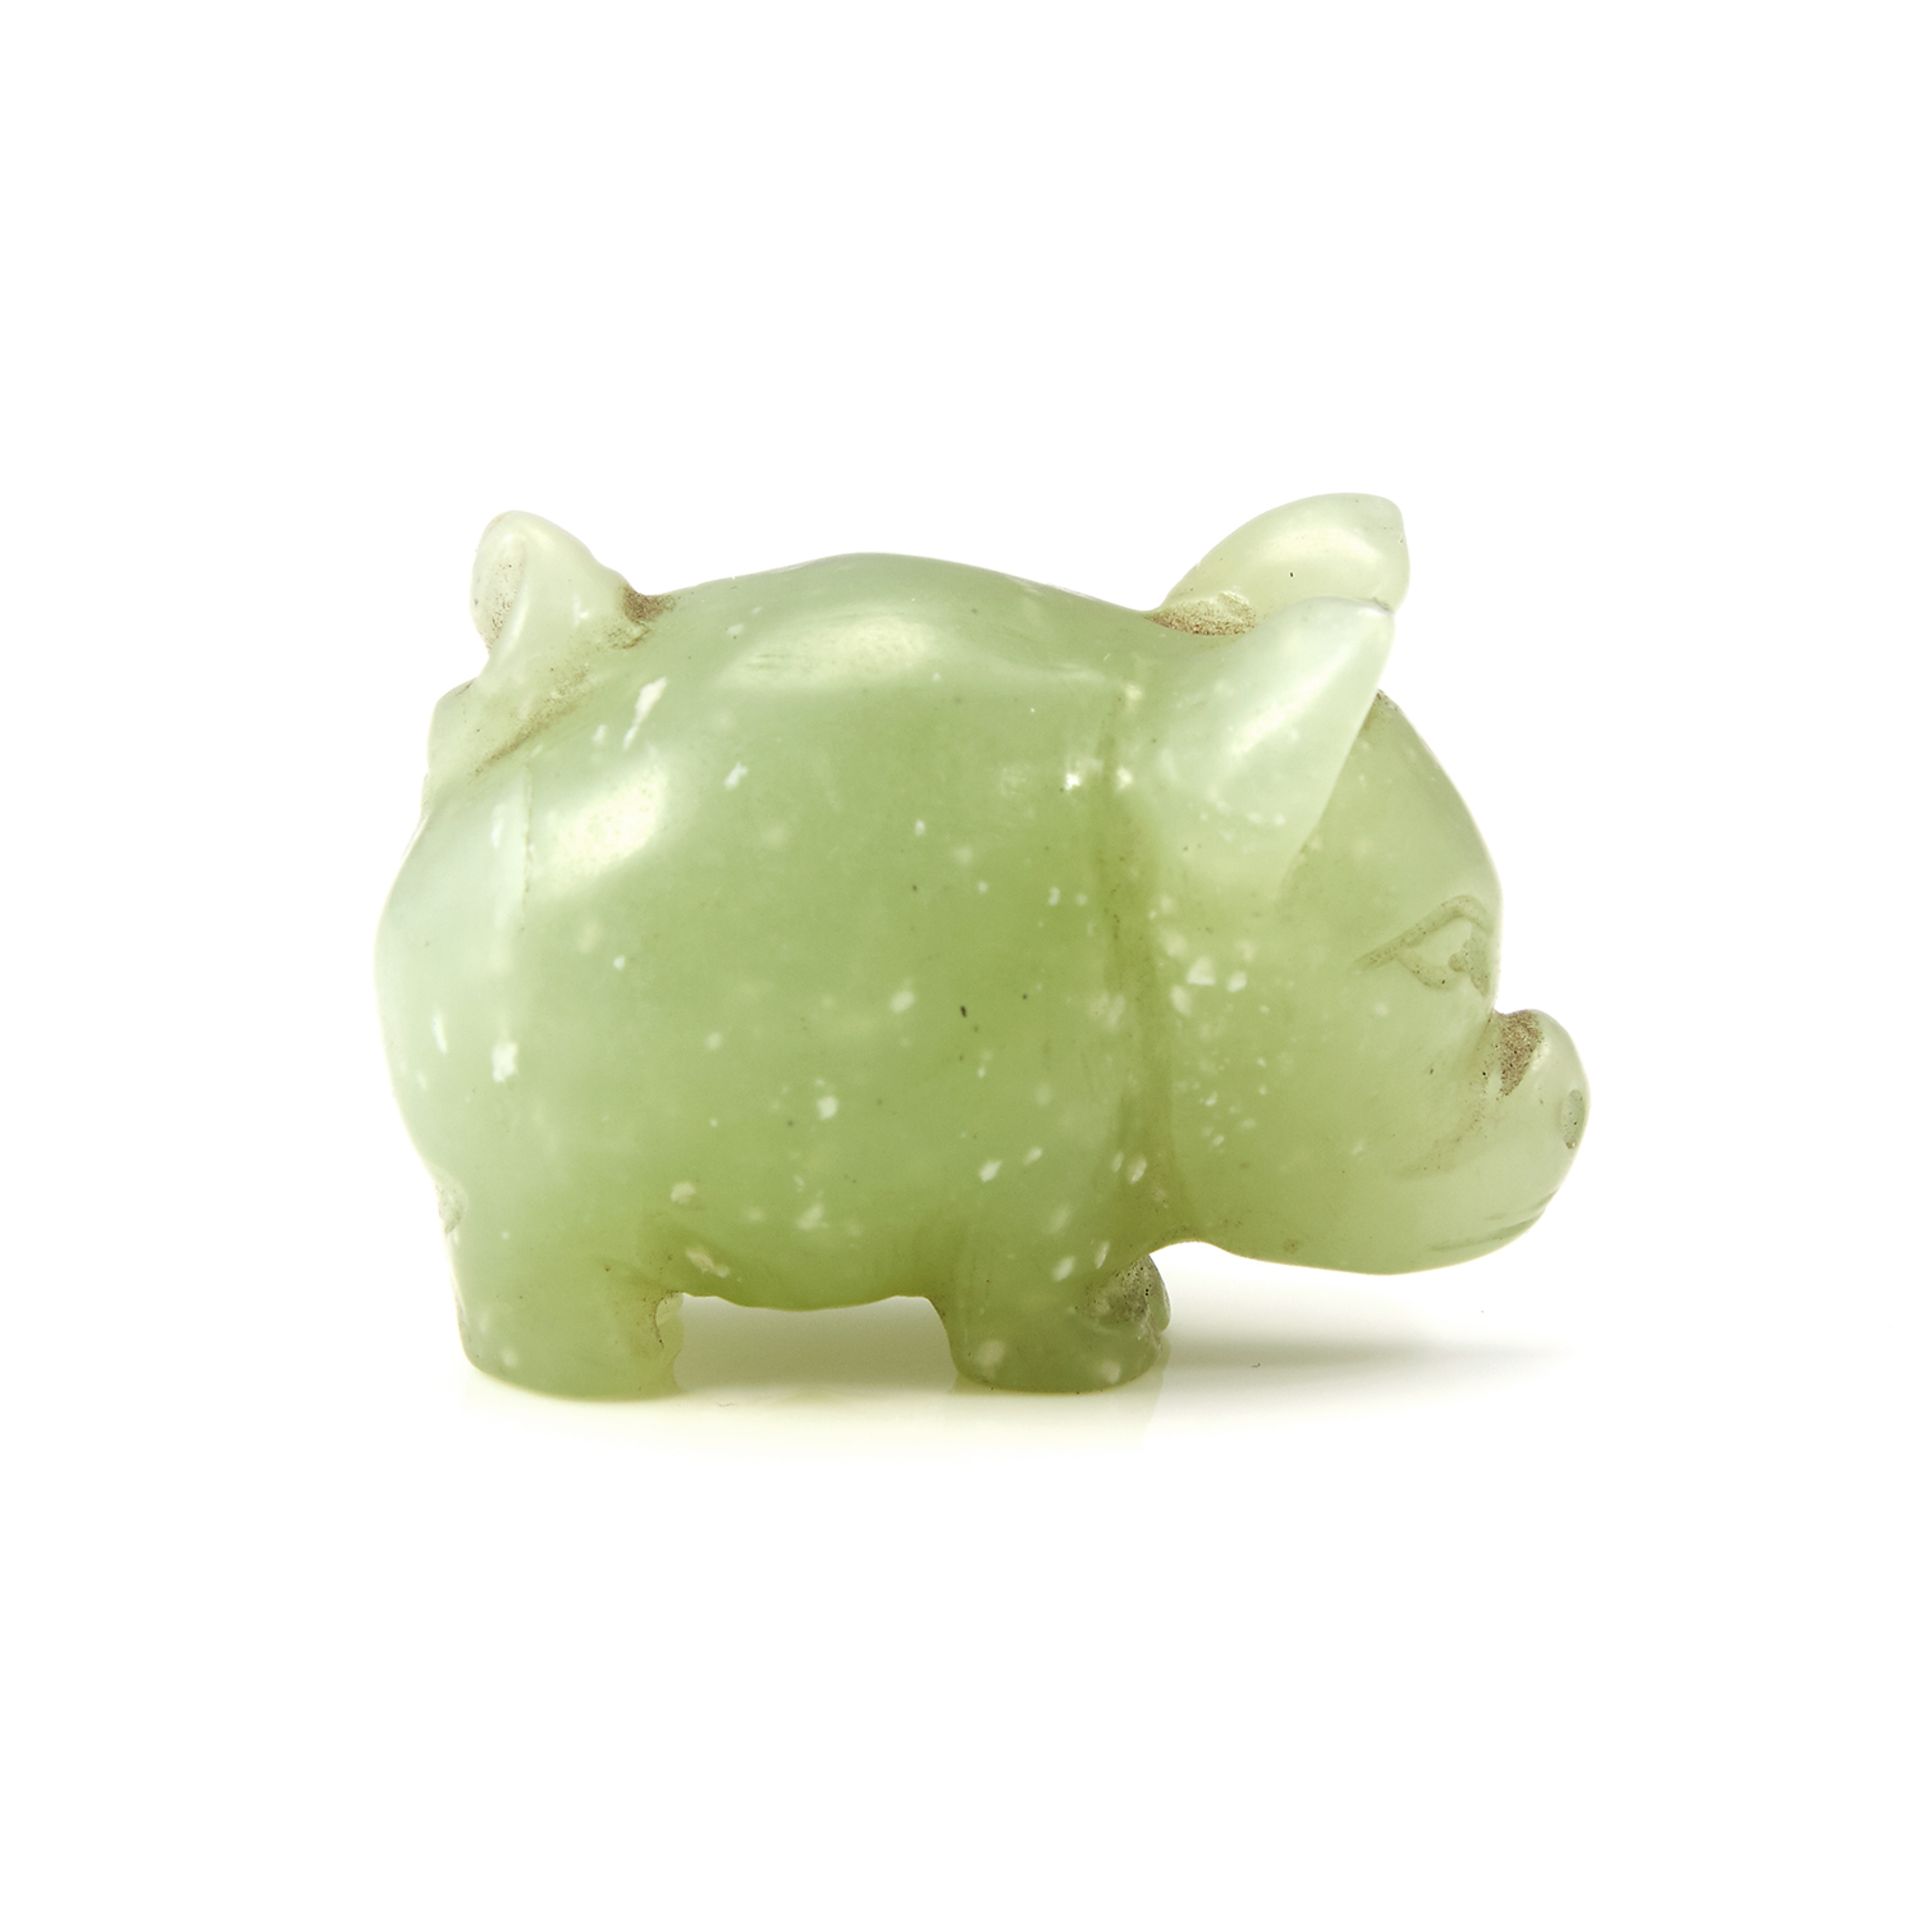 A CHINESE JADE PIG STATUE carved in the form of a standing pig, 4.2cm, 38g.